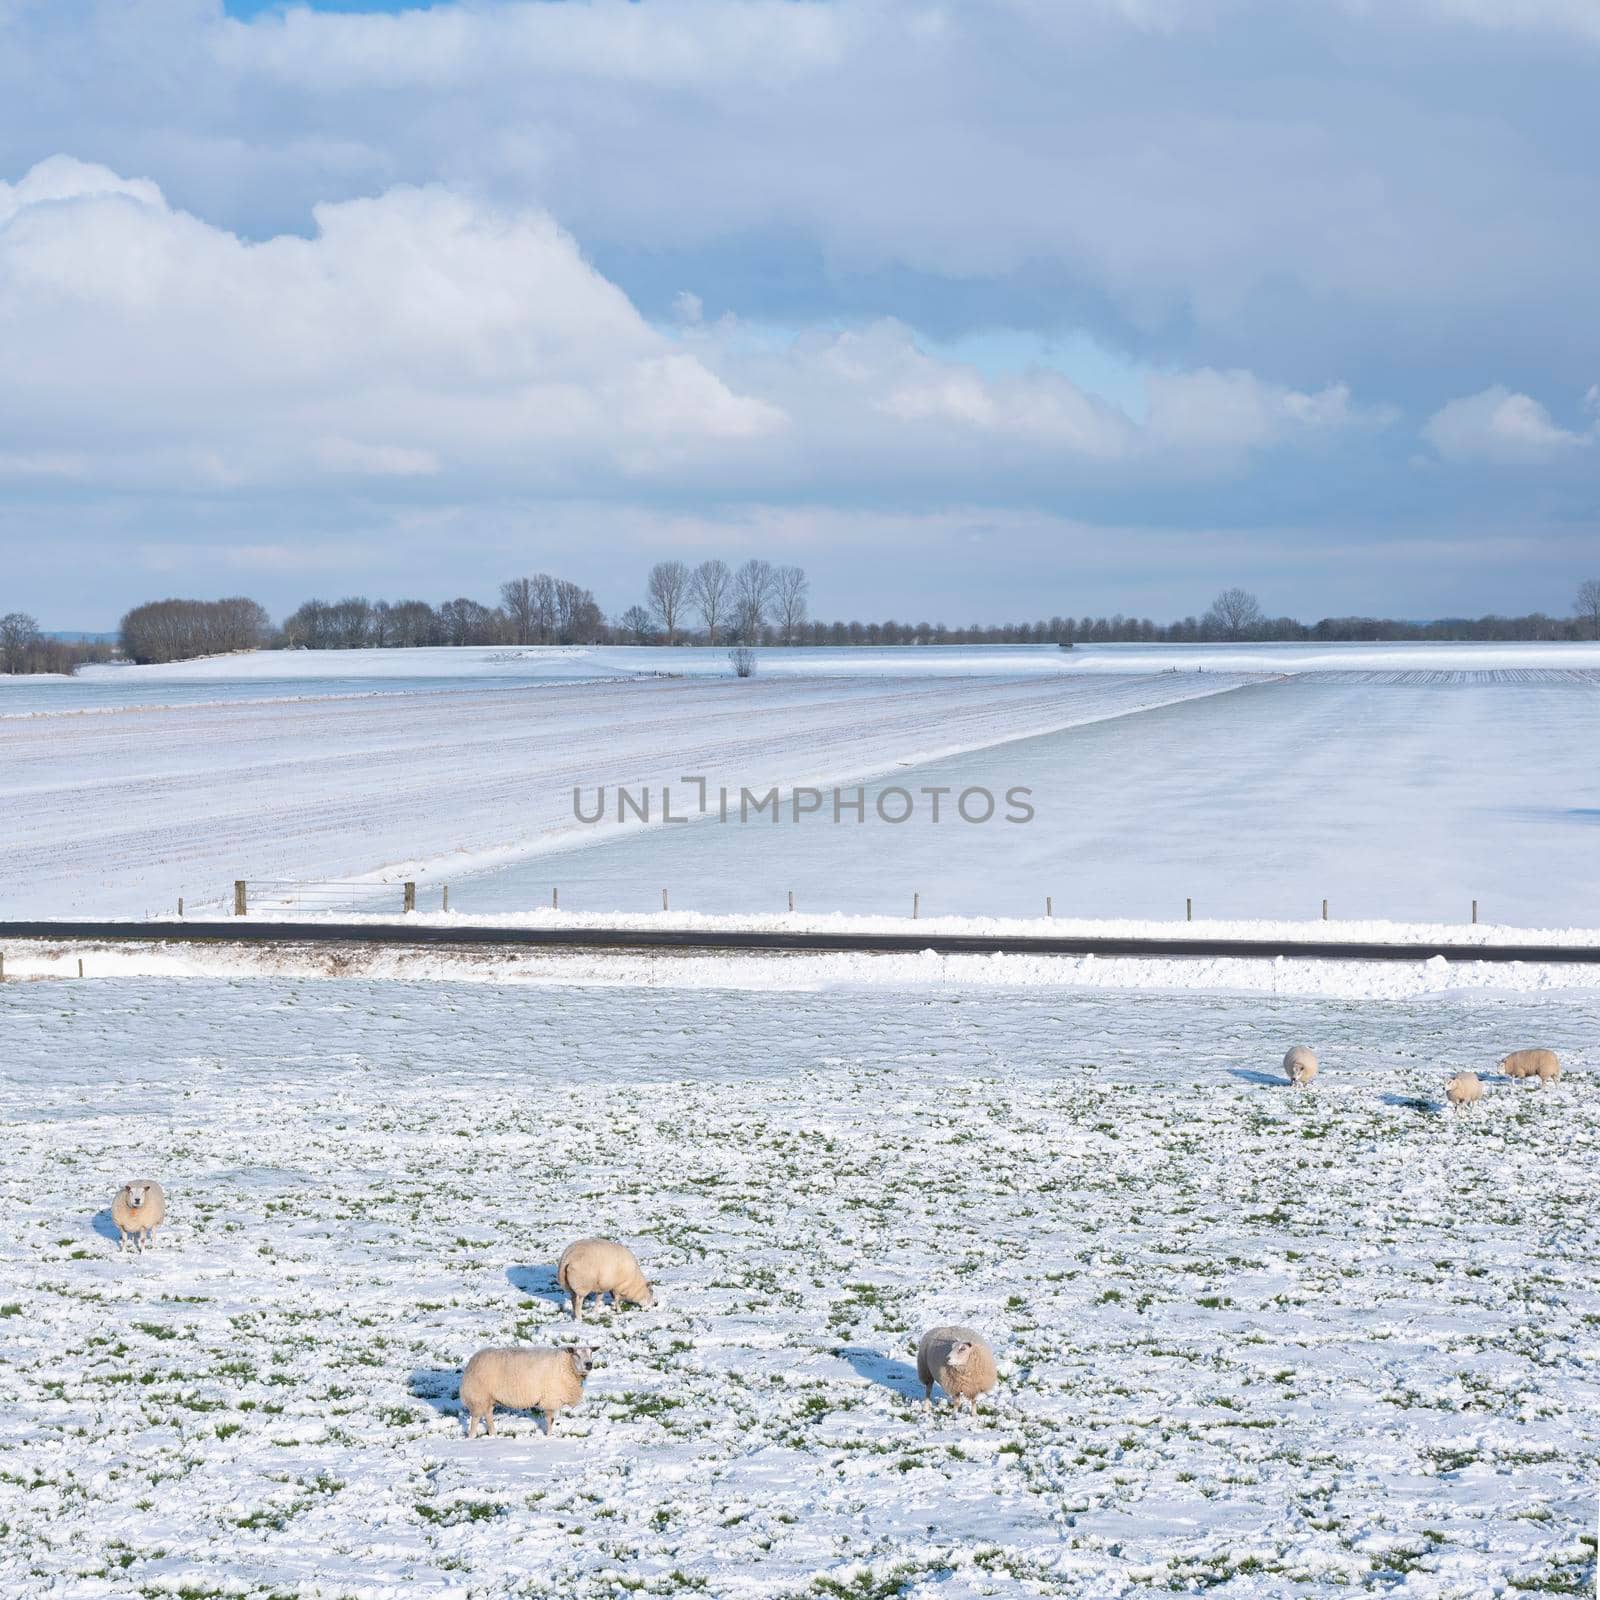 sheep in dutch meadow with snow and trees in holland under blue sky by ahavelaar